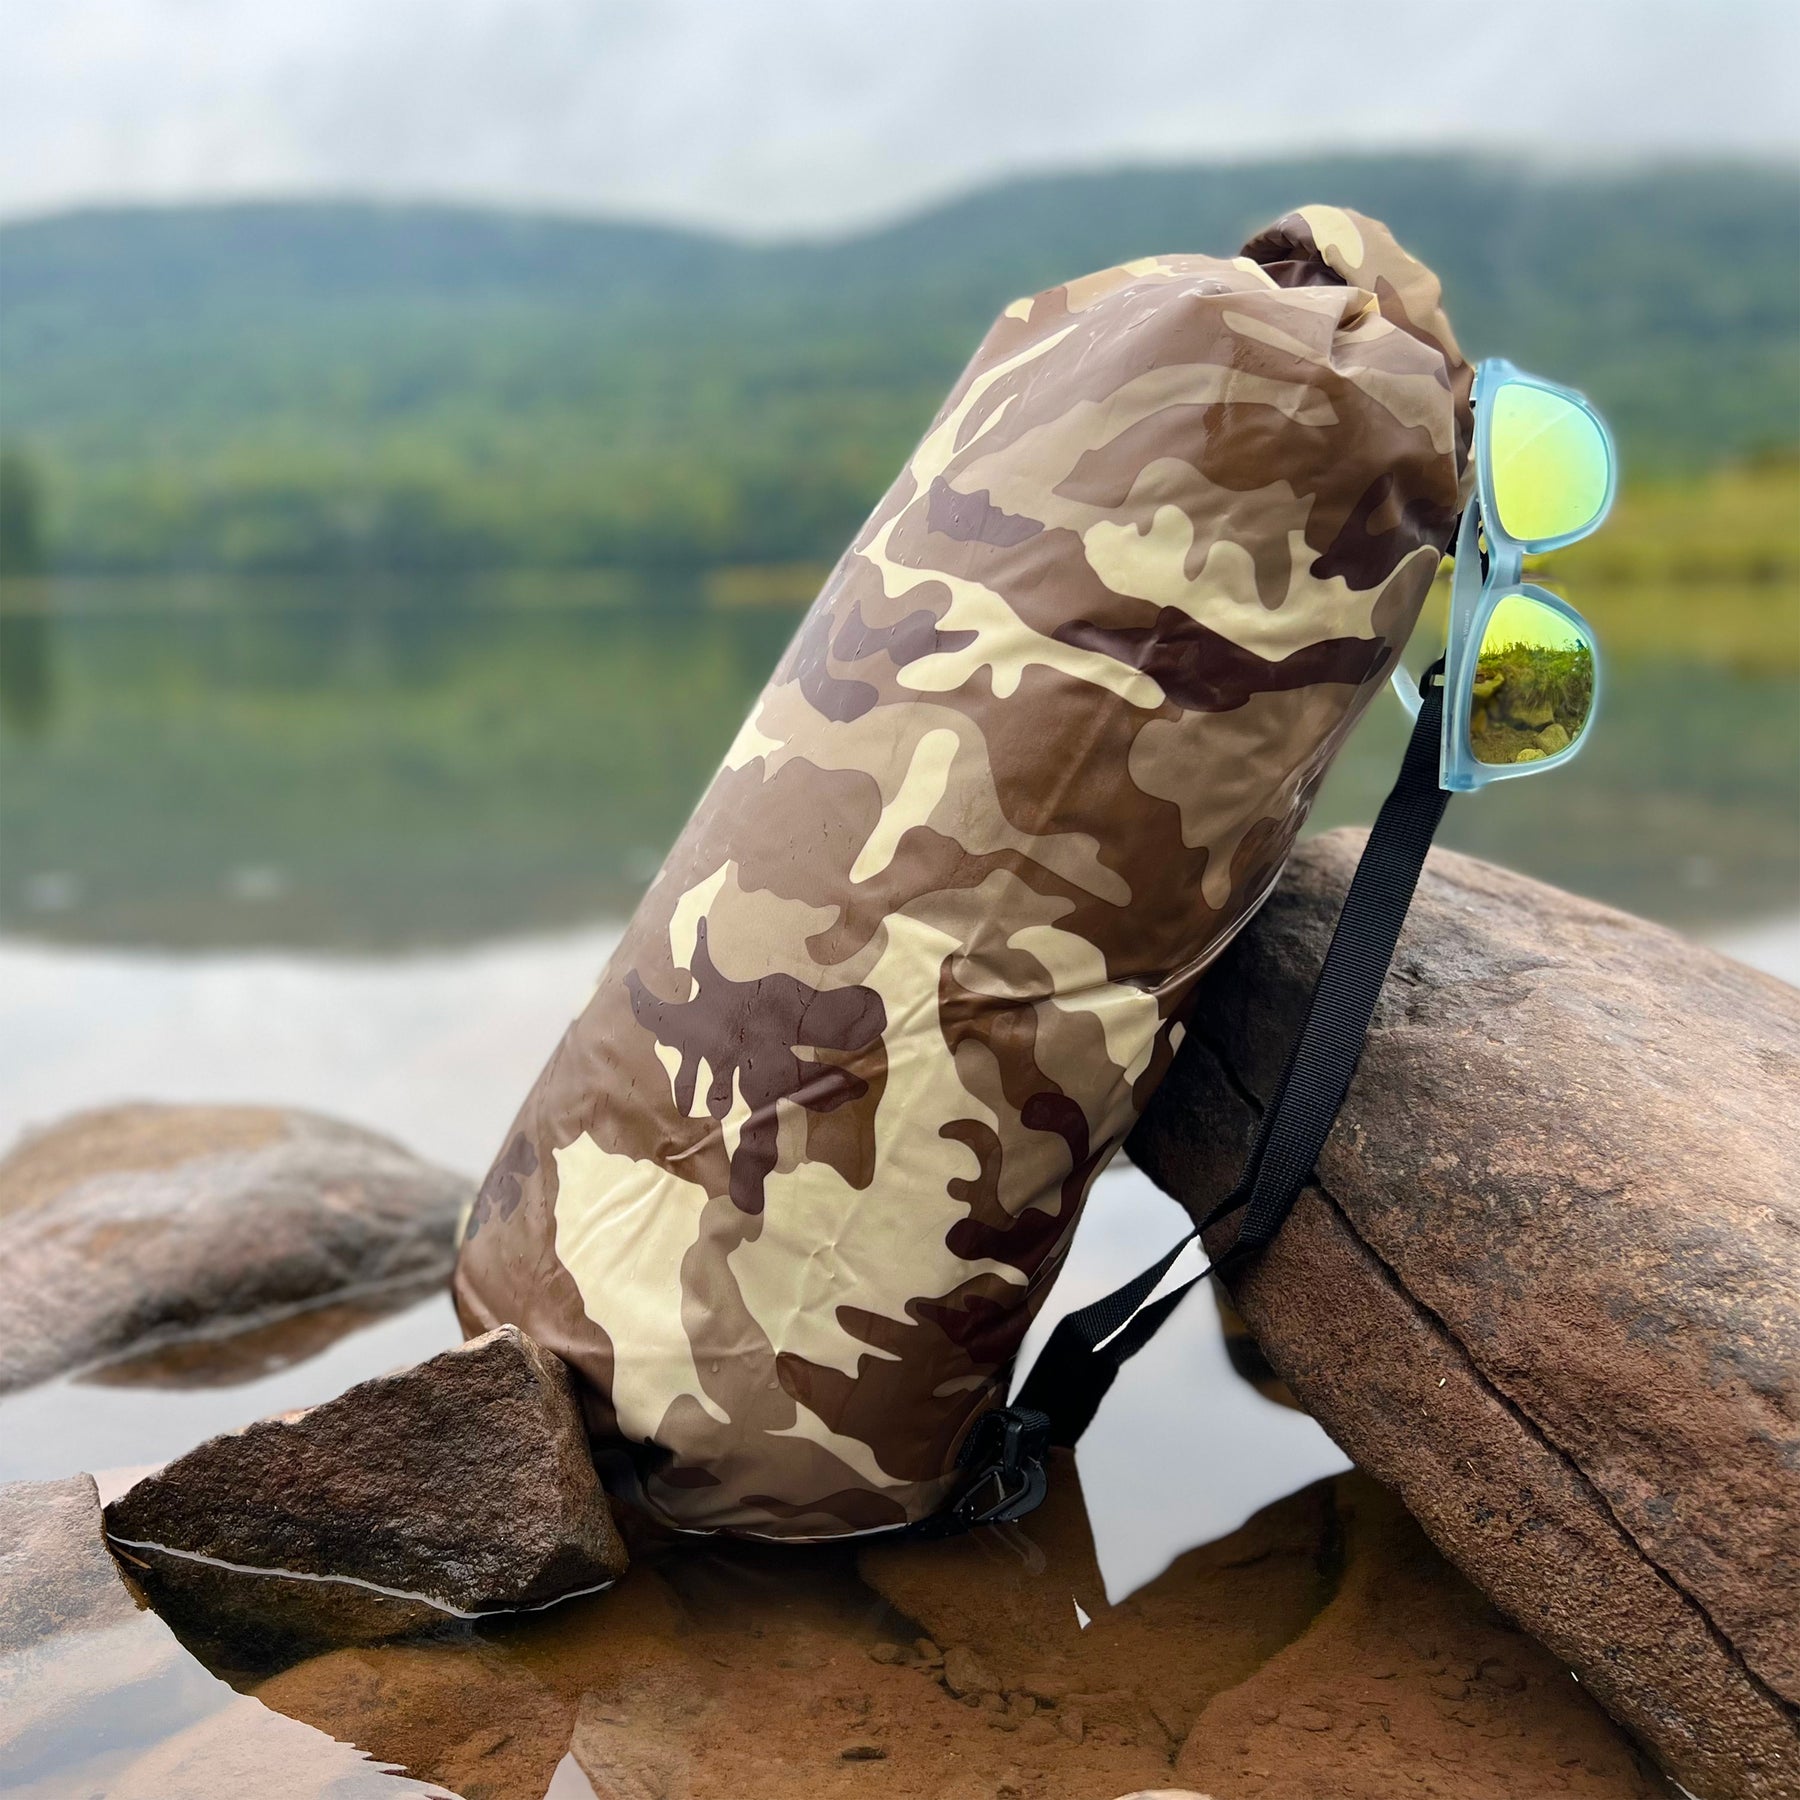 TrailGear 10 liter Heavy-Duty Camouflaged Dry Bag in the brown camo variation in shallow water and leaning against a rock with sunglass hung on the side of the bag.